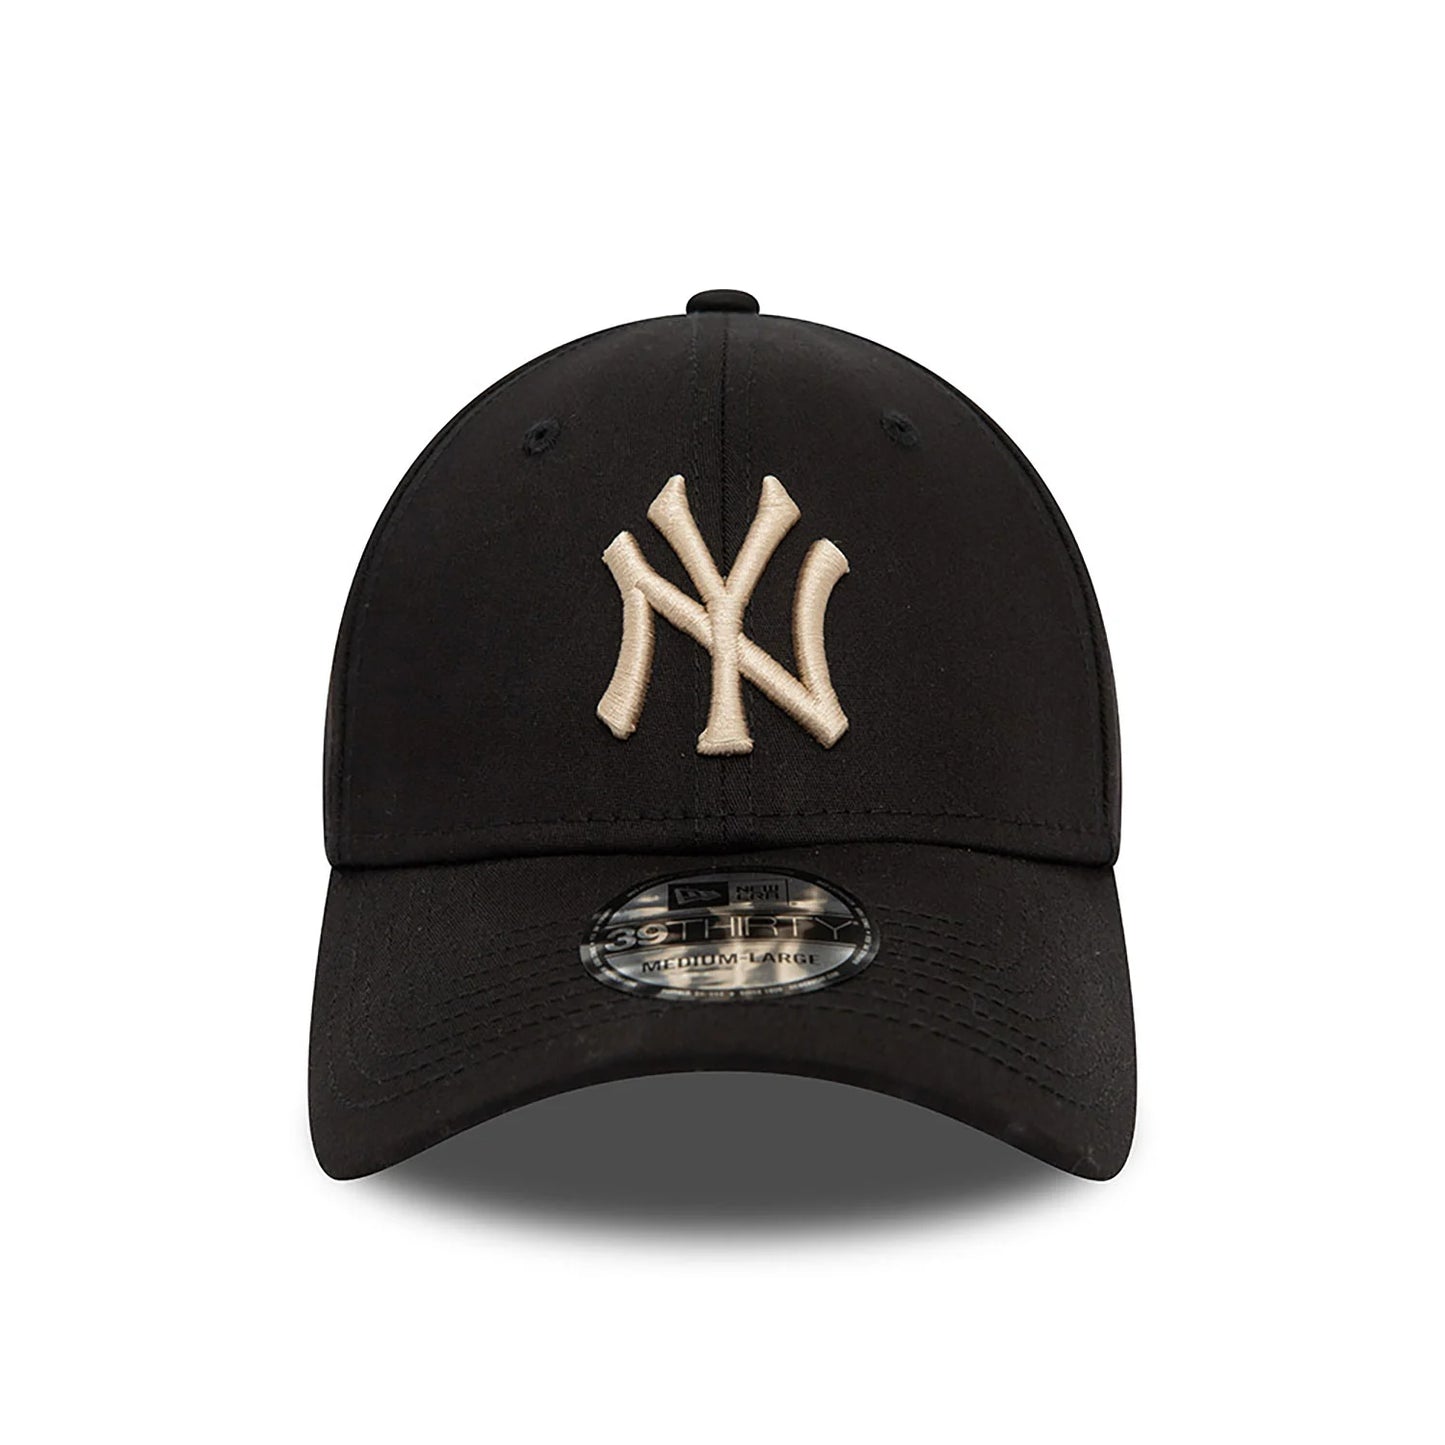 CAPPELLINO NY YANKEES ESSENTIAL 39THIRTY